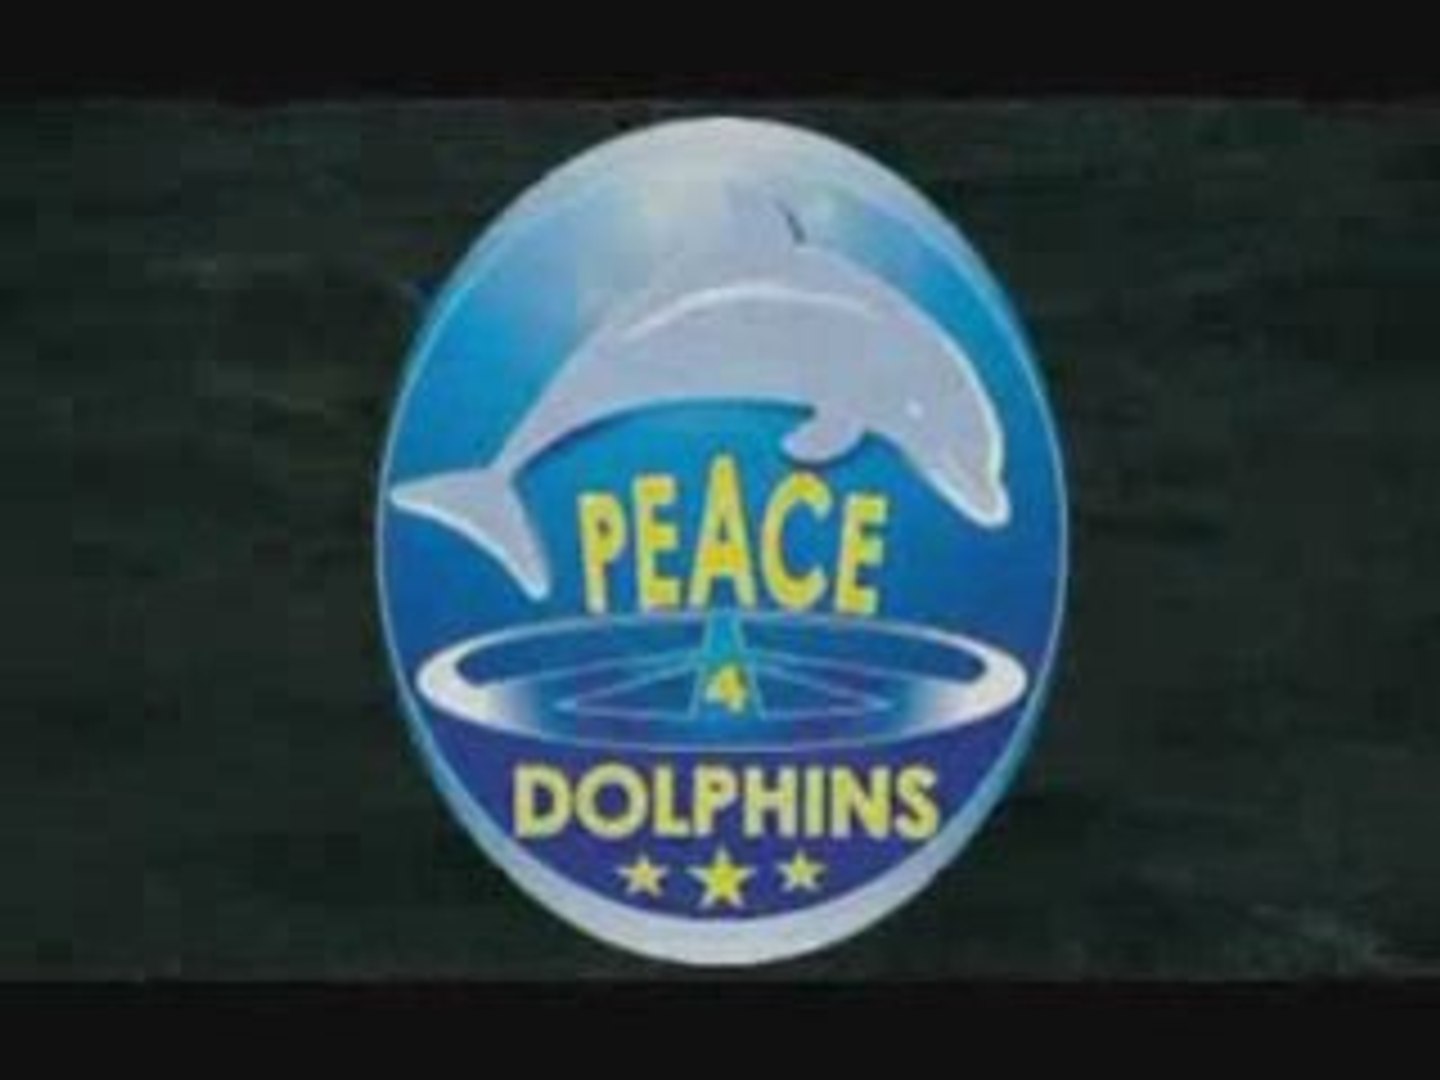 PEACE 4 DOLPHINS